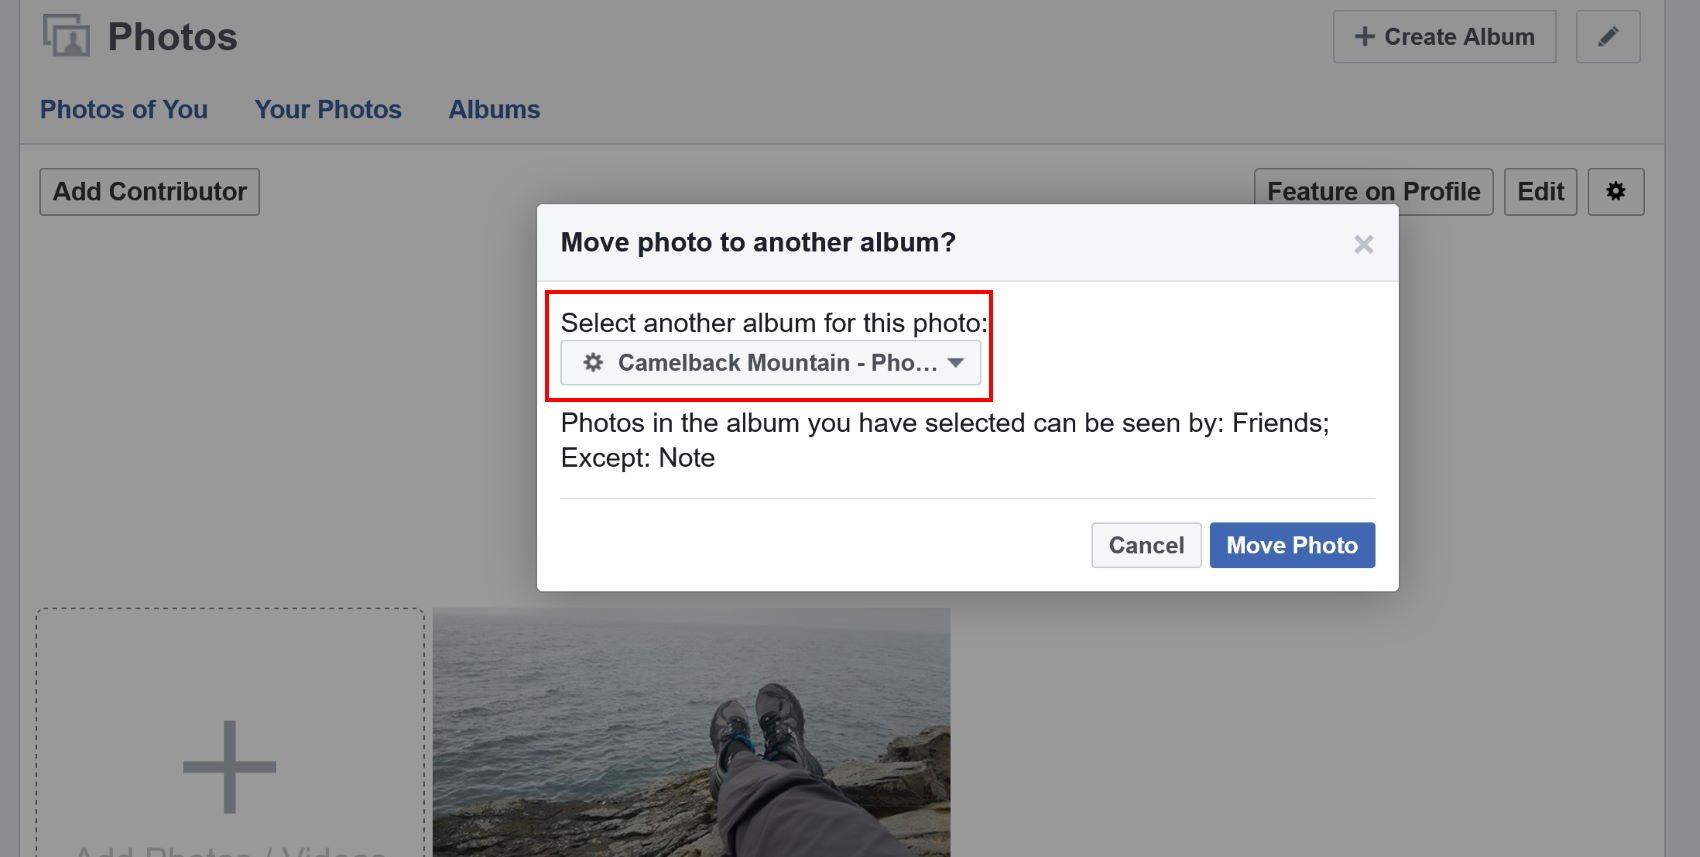 How to remove tag and missing tag on a Facebook album or photos